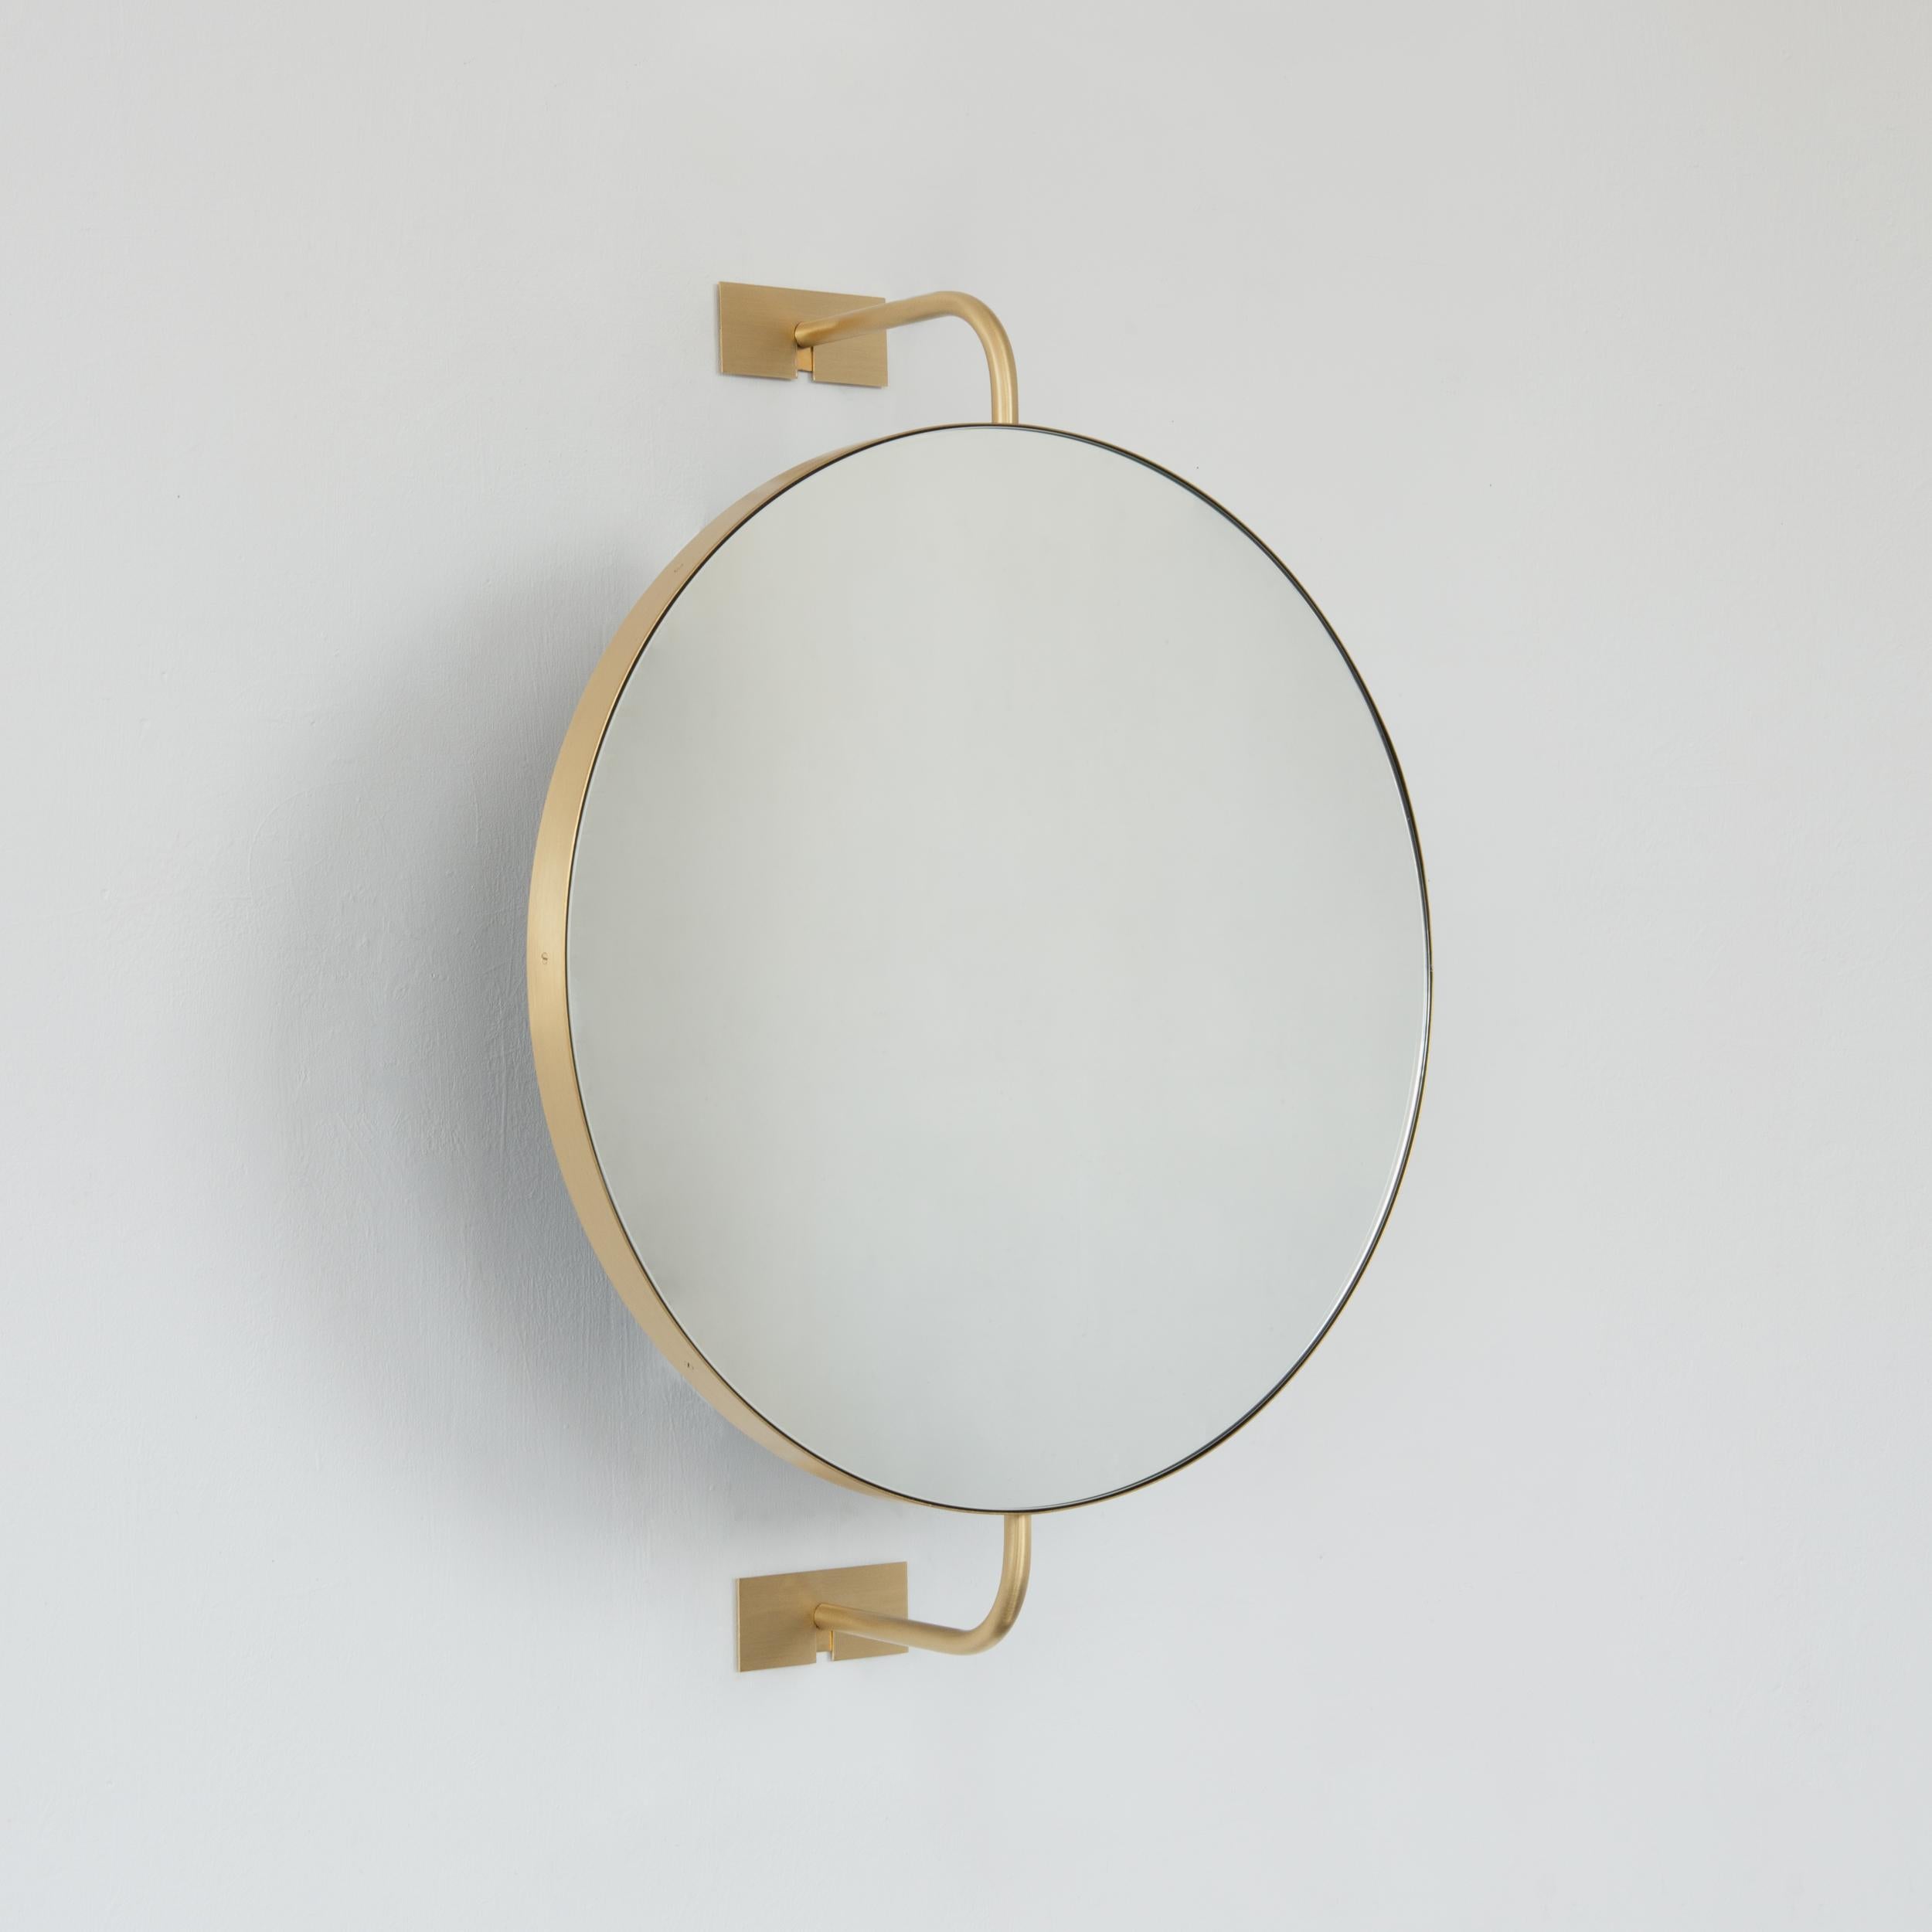 Art Deco Vorso Wall Attached Suspended Rotating Round Mirror with Brushed Brass Frame For Sale